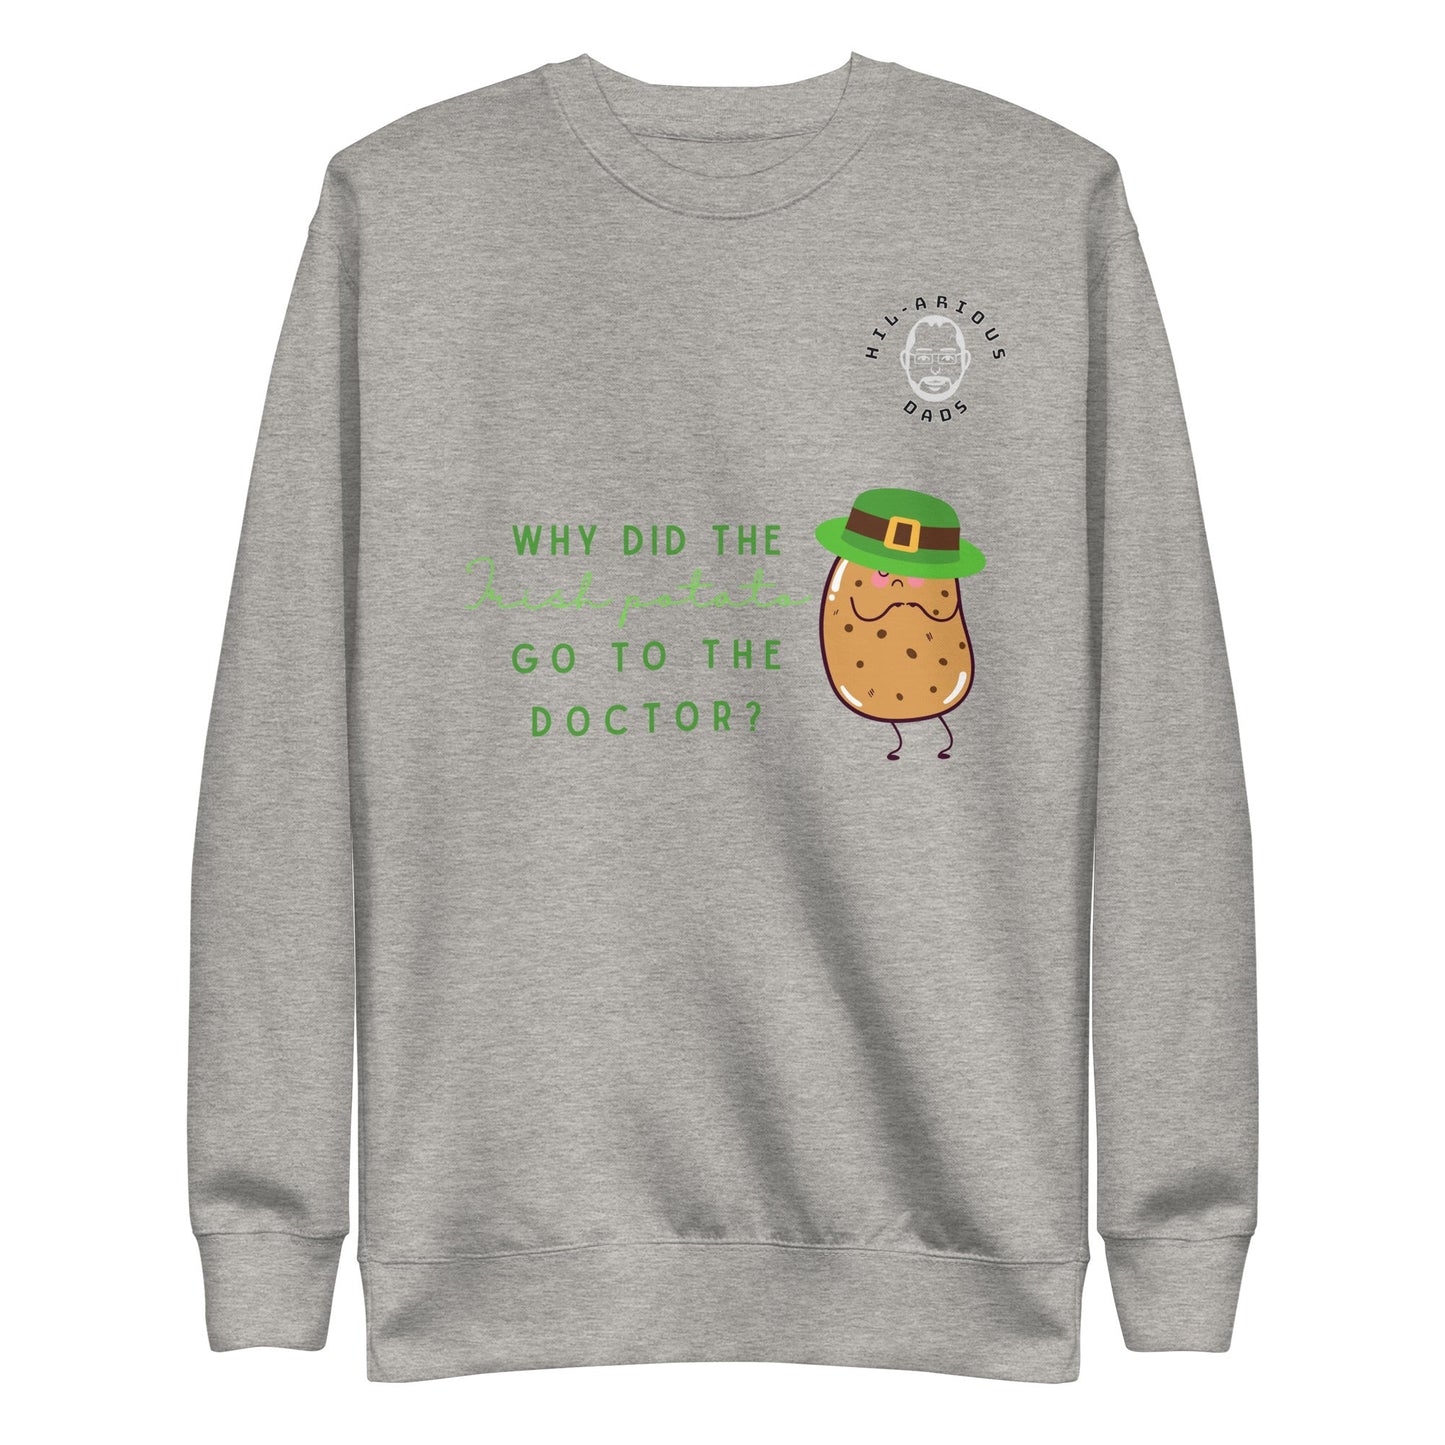 Why did the Irish potato go to the doctor?-Sweatshirt - Hil-arious Dads